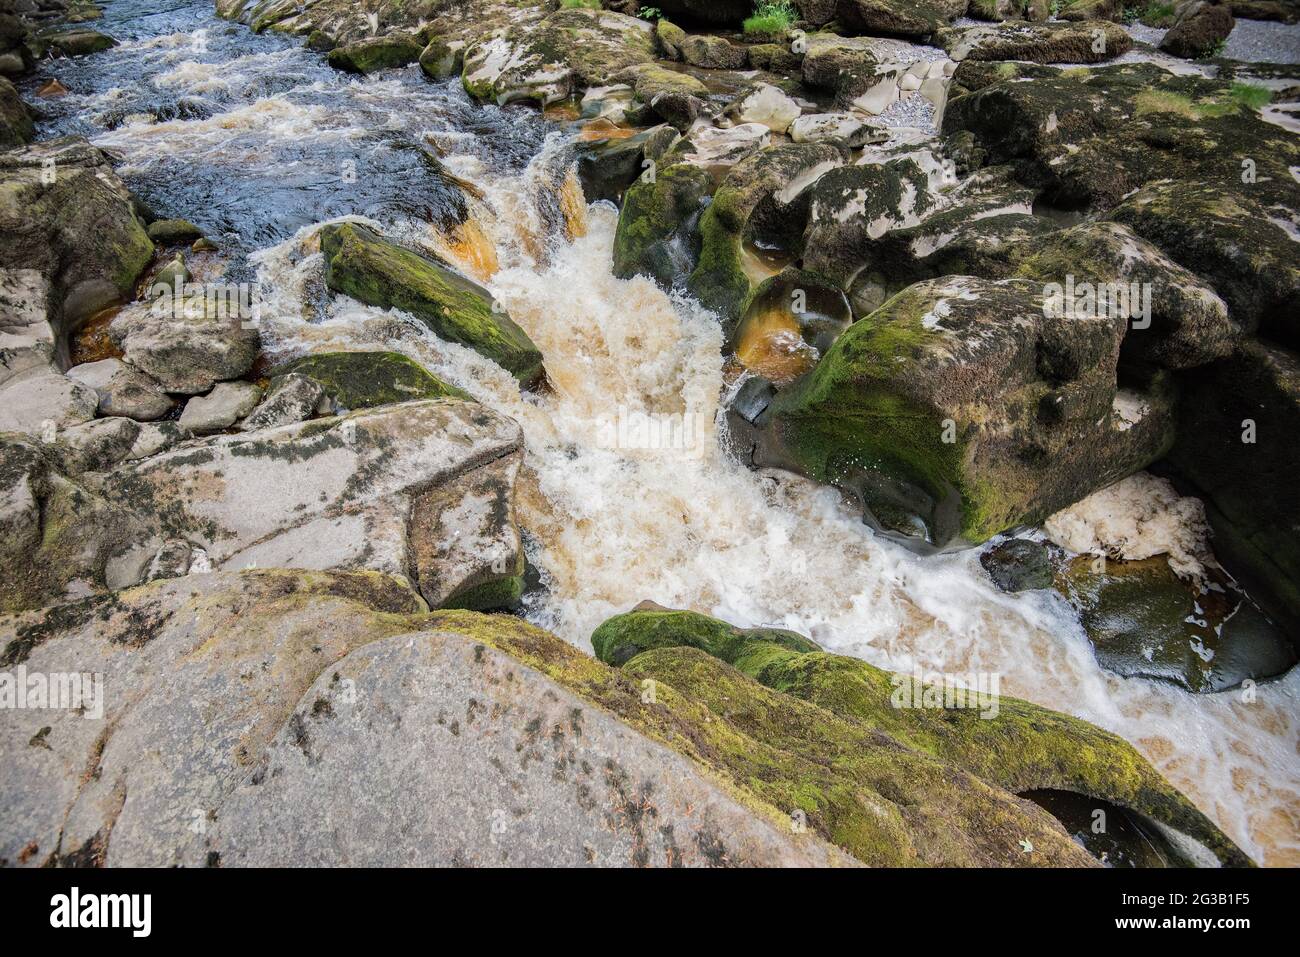 The Bolton Strid: The Most Dangerous River In The World? Stock Photo